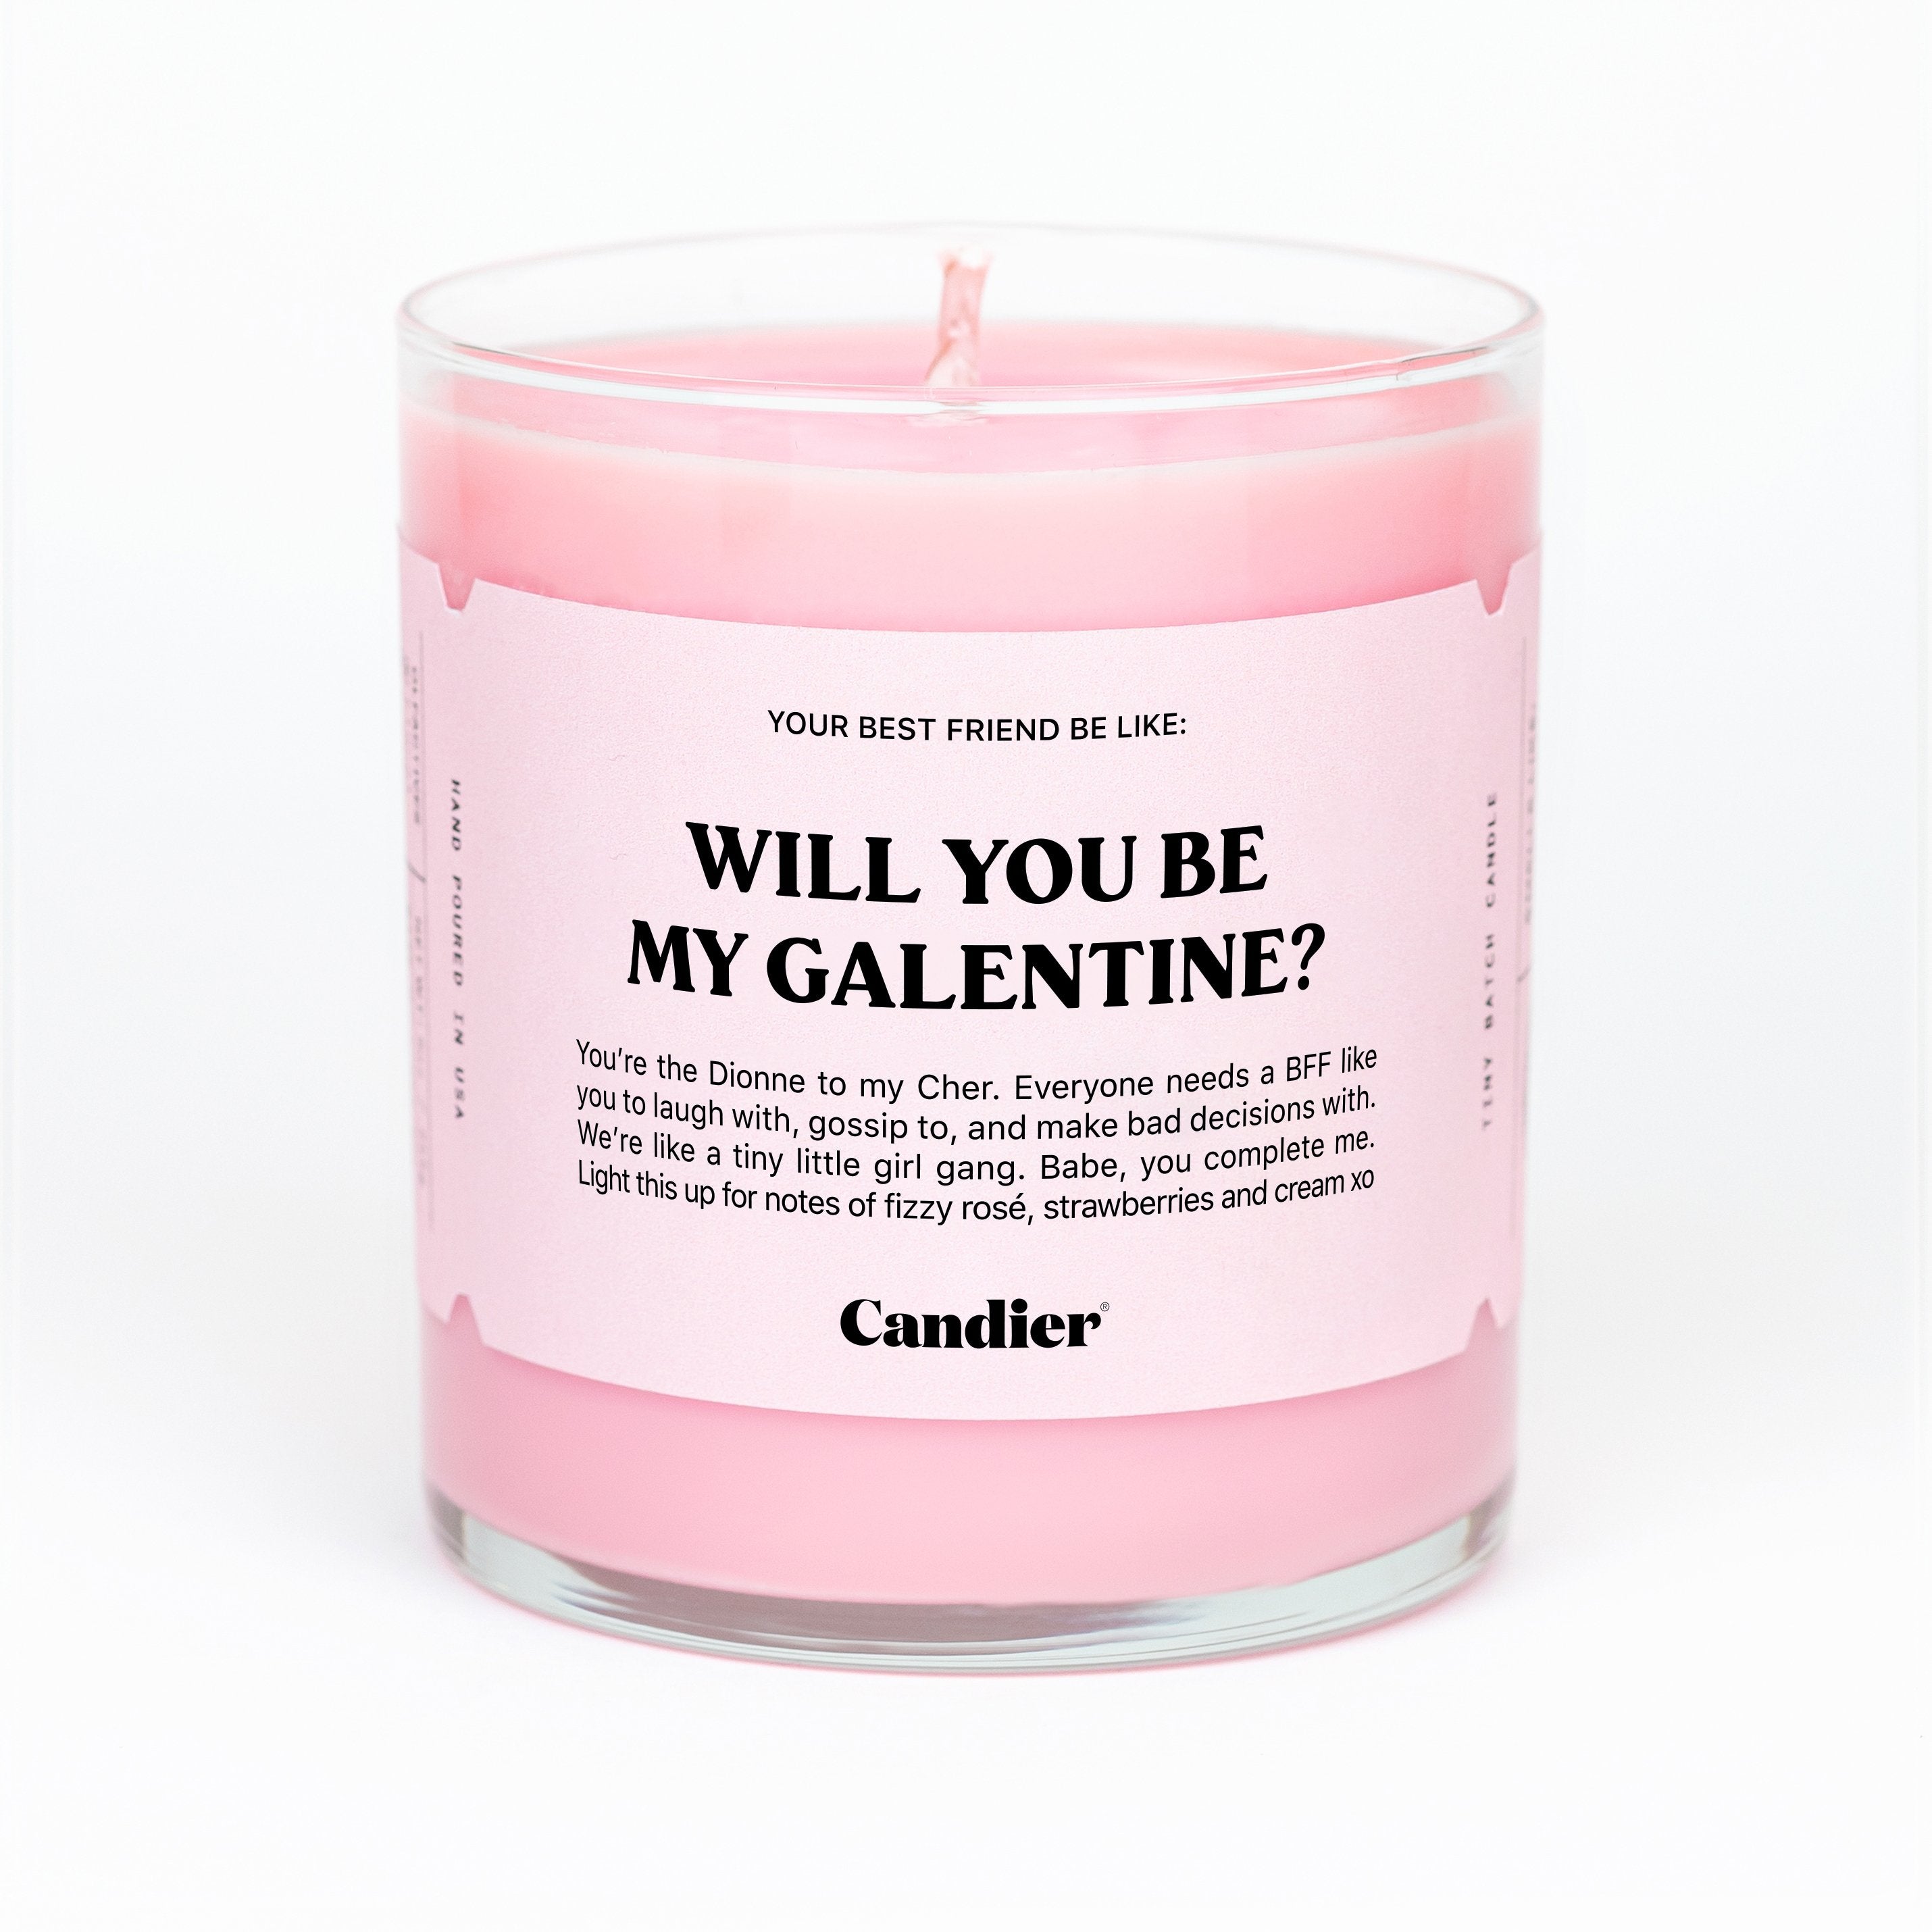 Will you be my Galentine?